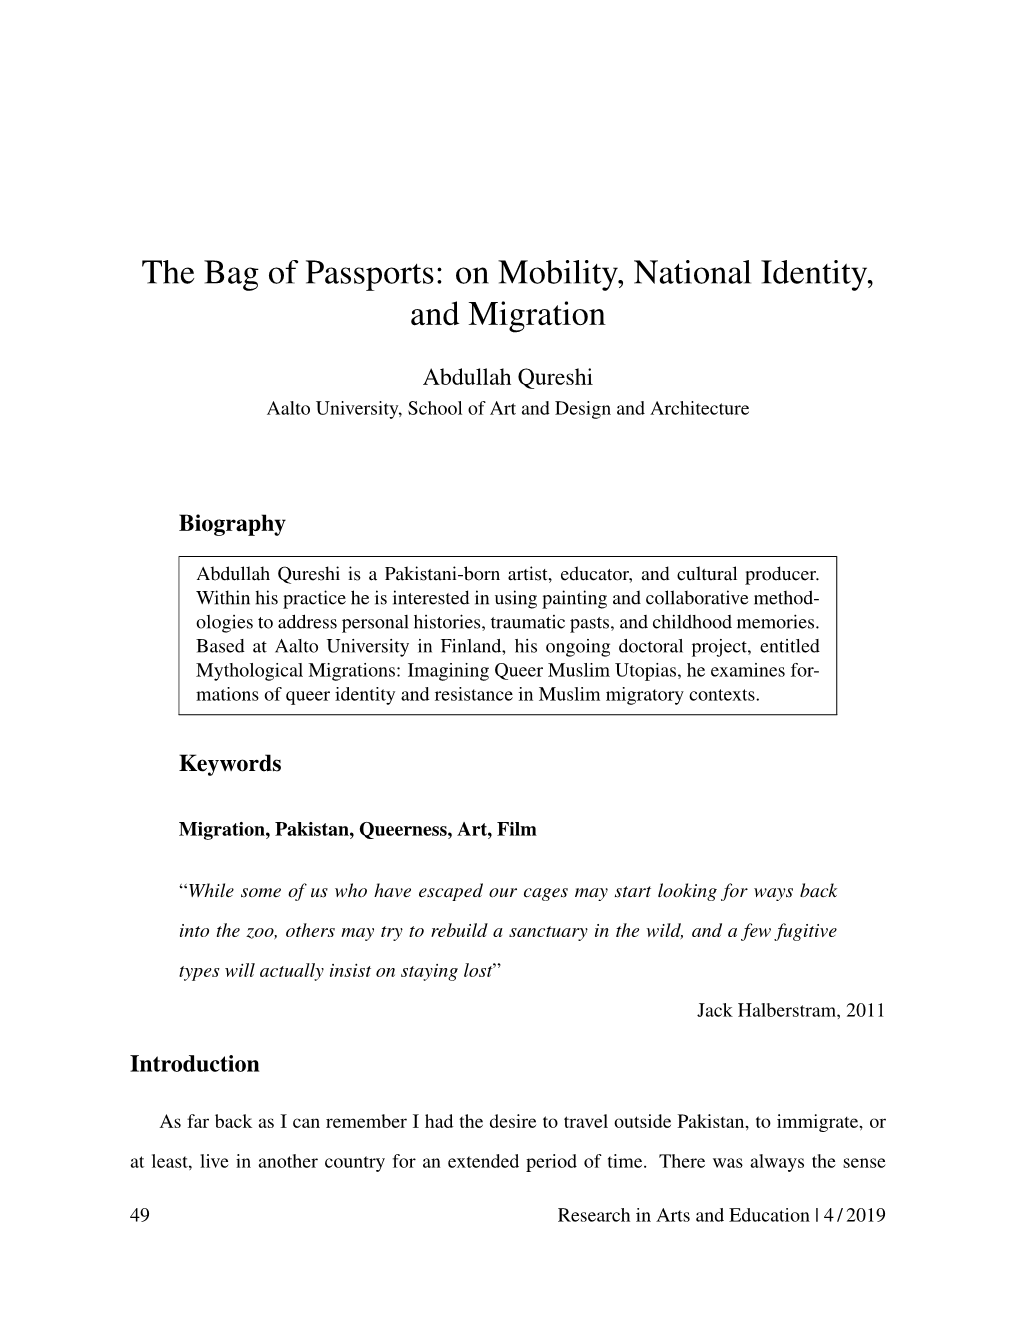 On Mobility, National Identity, and Migration